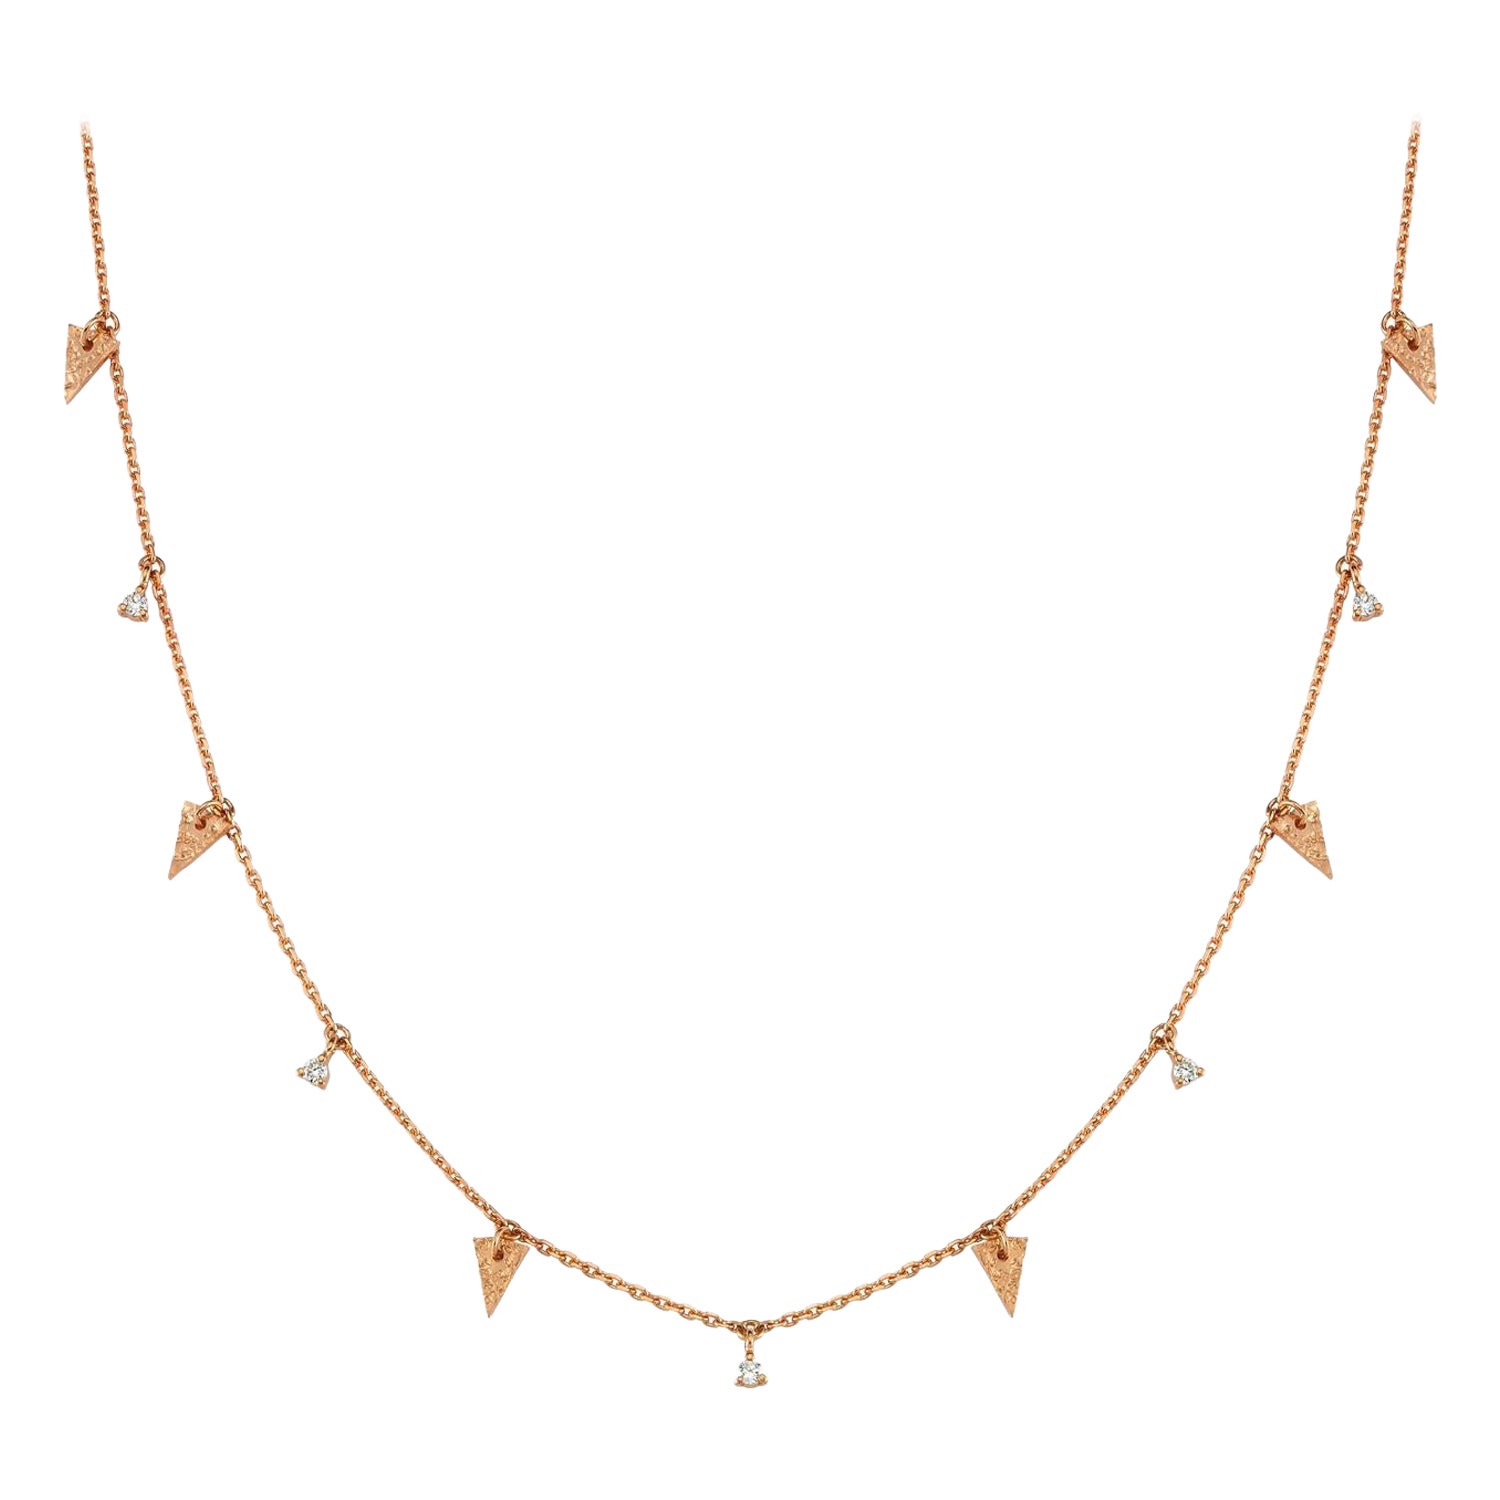 Catch You Seed Neclace in 14K Rose Gold with White Diamond by Selda Jewellery